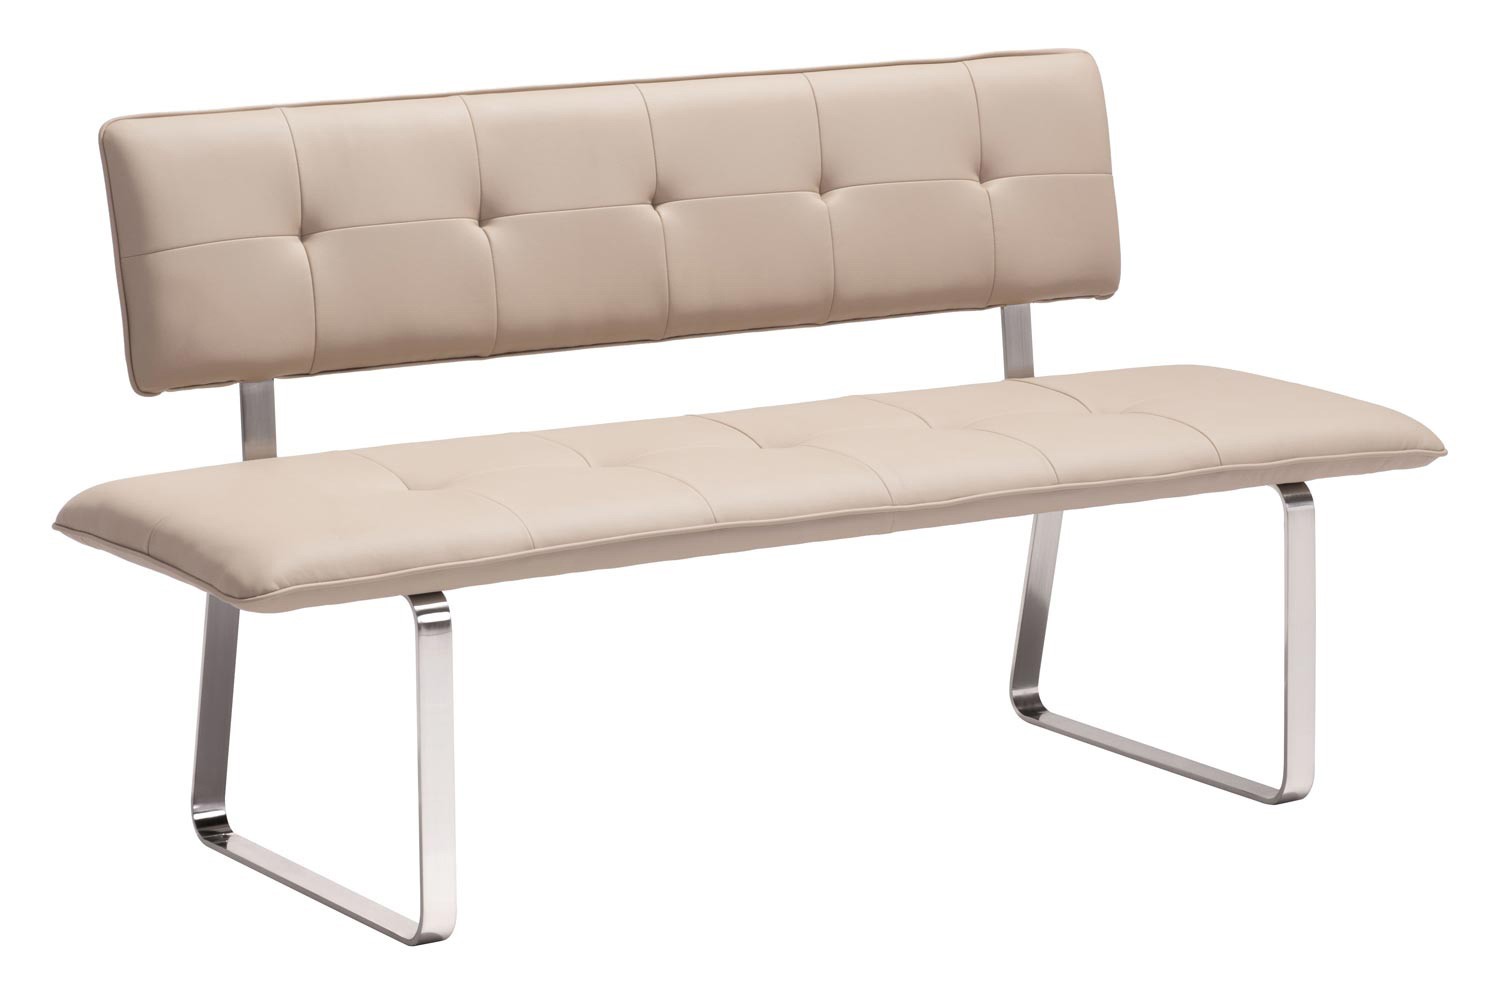 Zuo Modern Nouveau Bench - Taupe